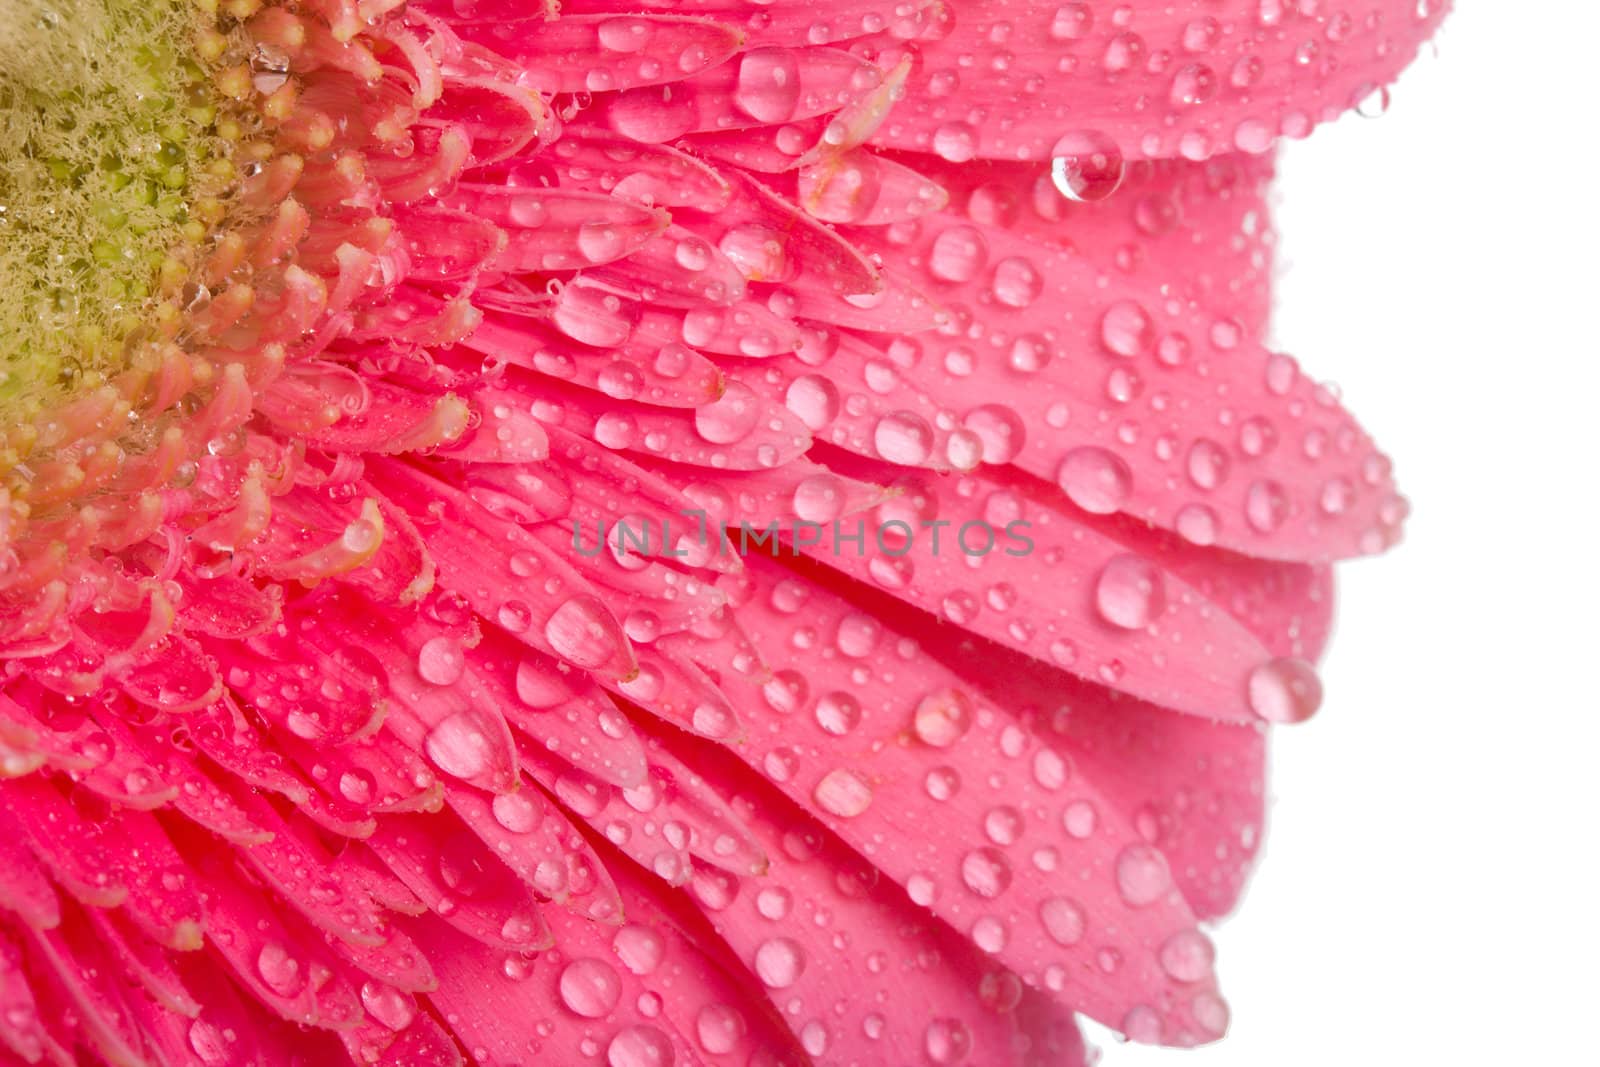 pink gerbera with drops of water by Alekcey